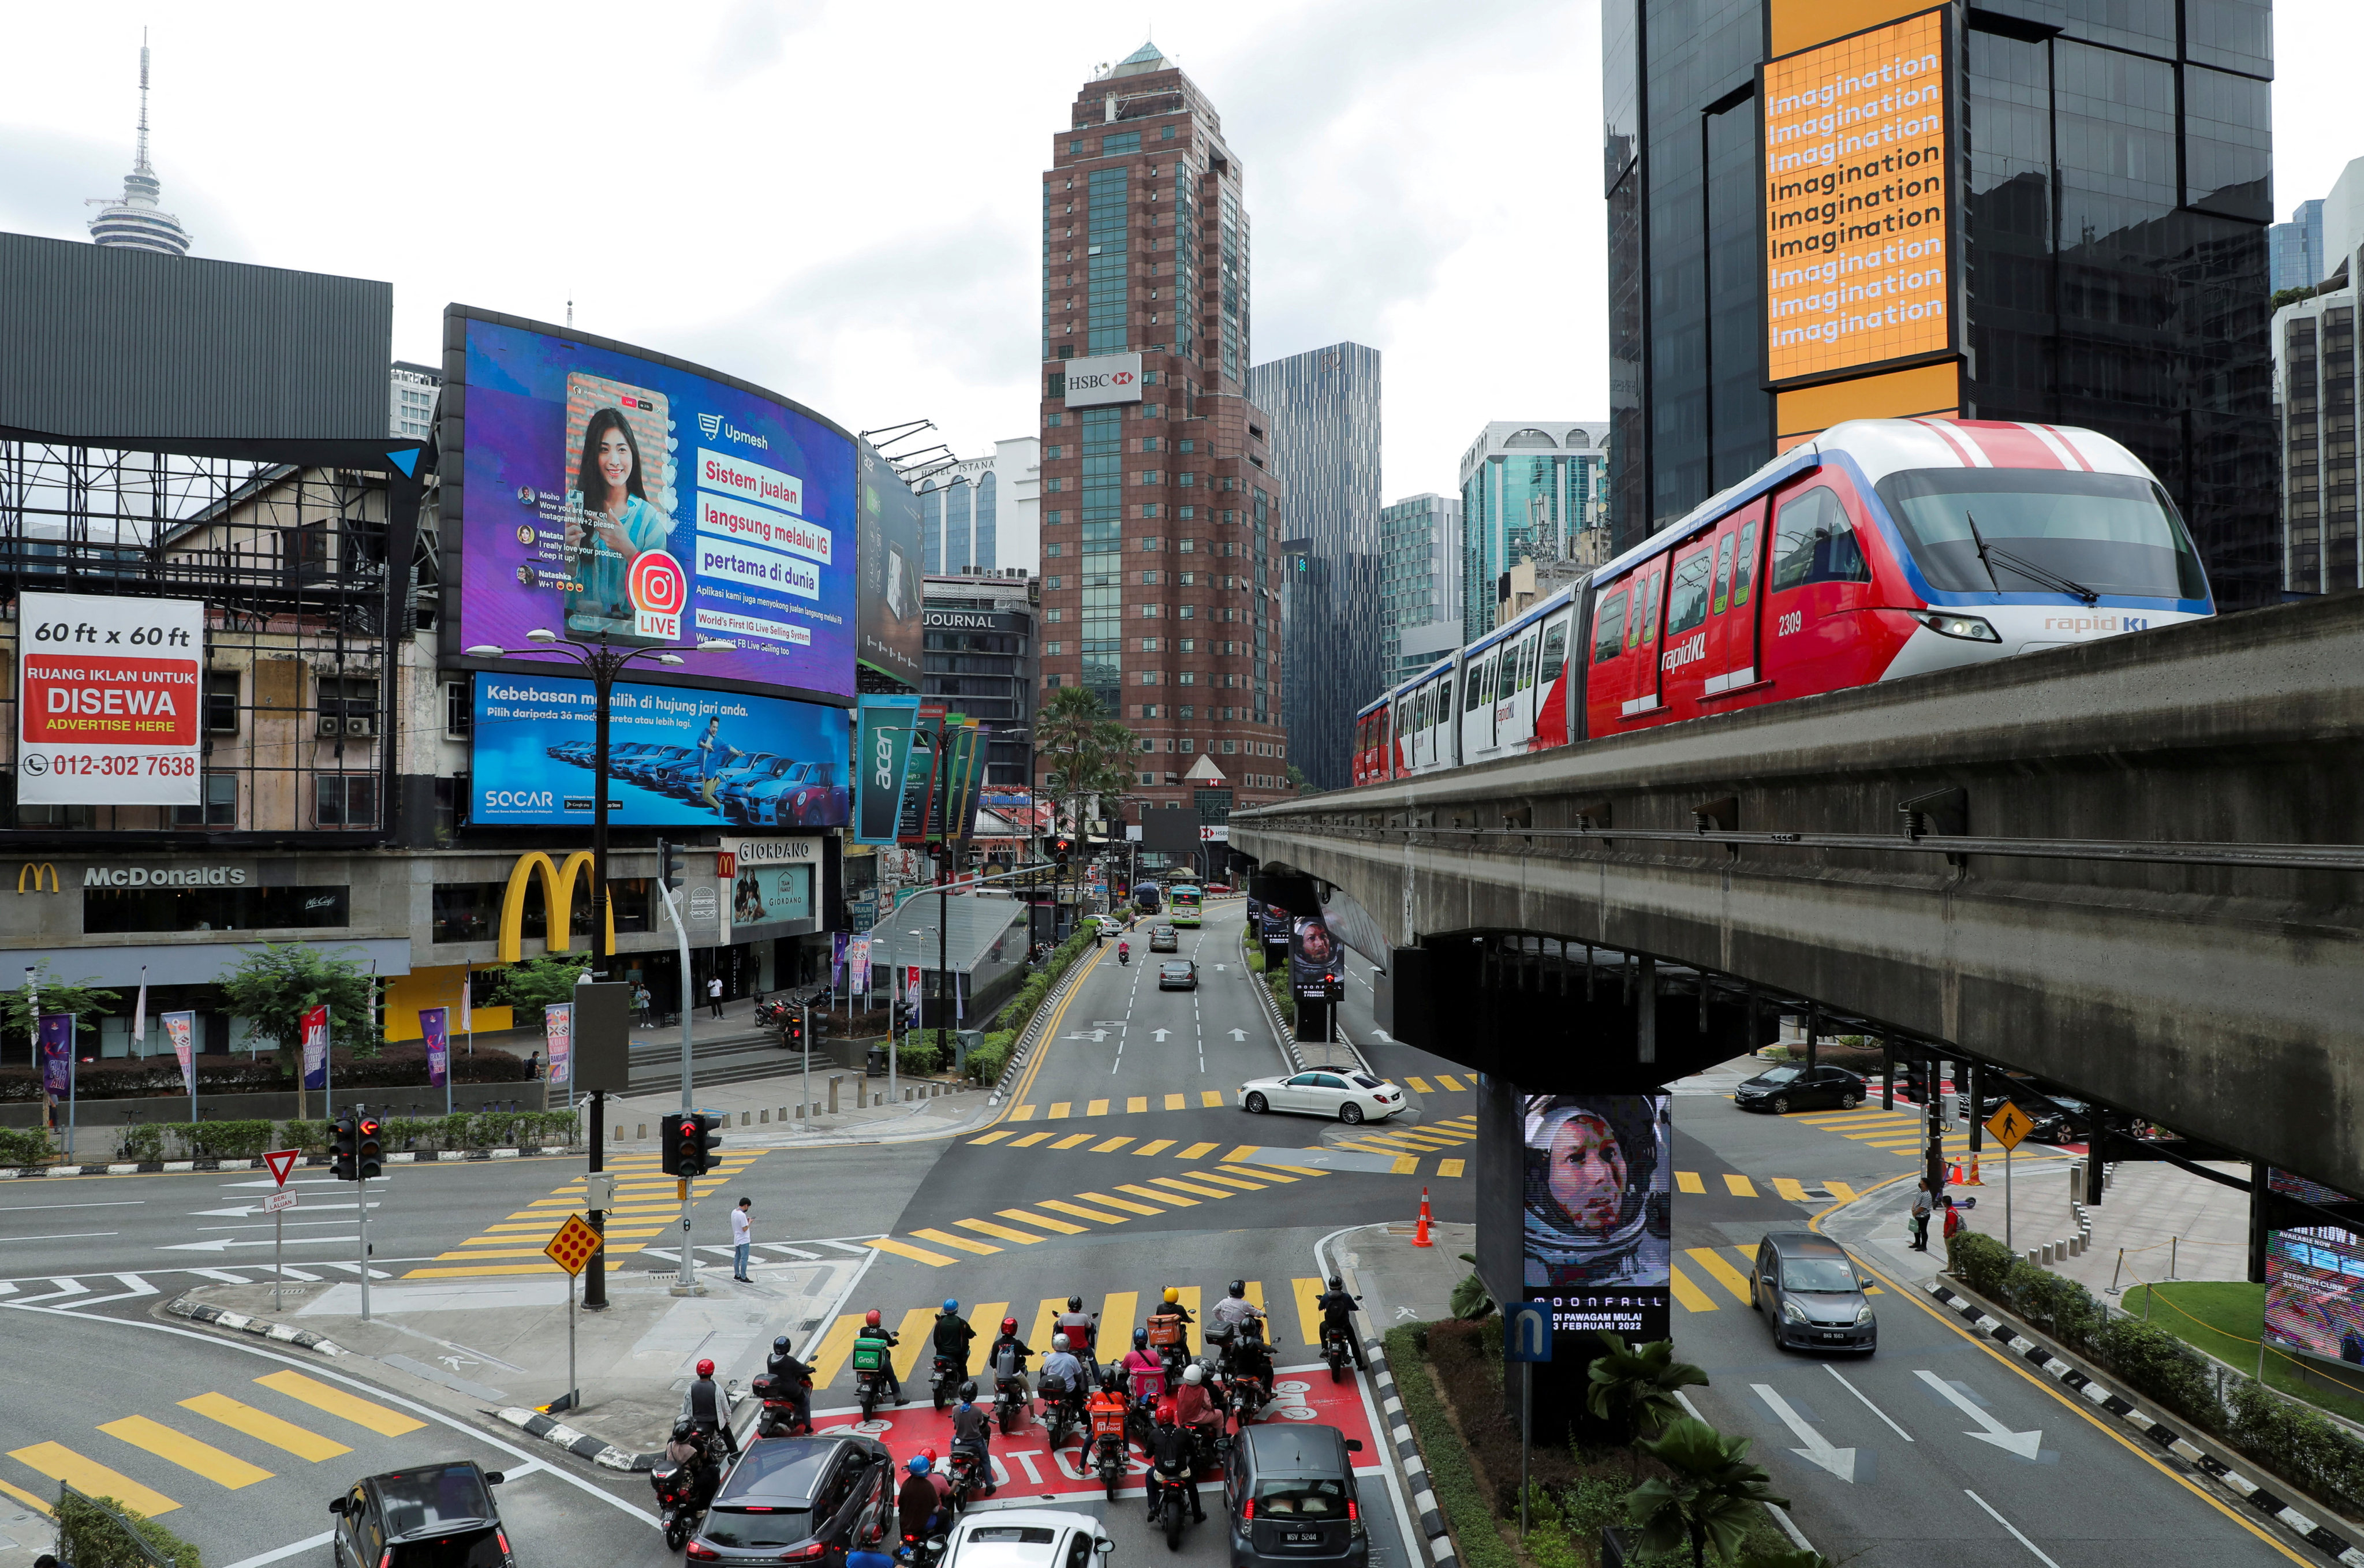 A general view of the Bukit Bintang shopping district in Kuala Lumpur, as Malaysia gears up for its 15th general election, which is likely to be the most hotly contested so far. Photo: Reuters